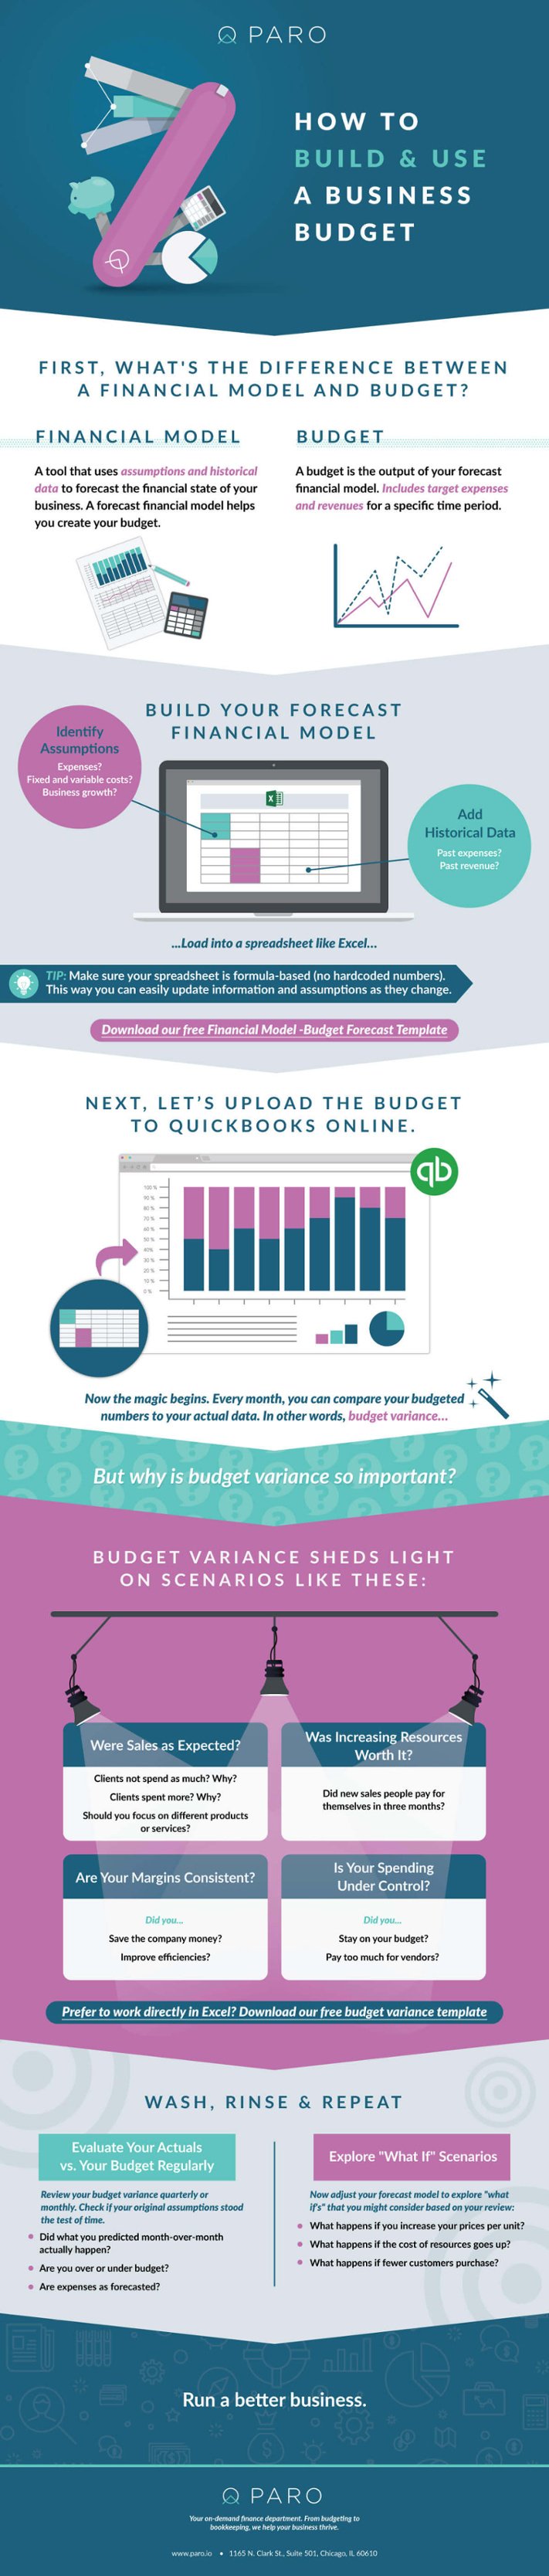 build-business-budget-infographic-plaza